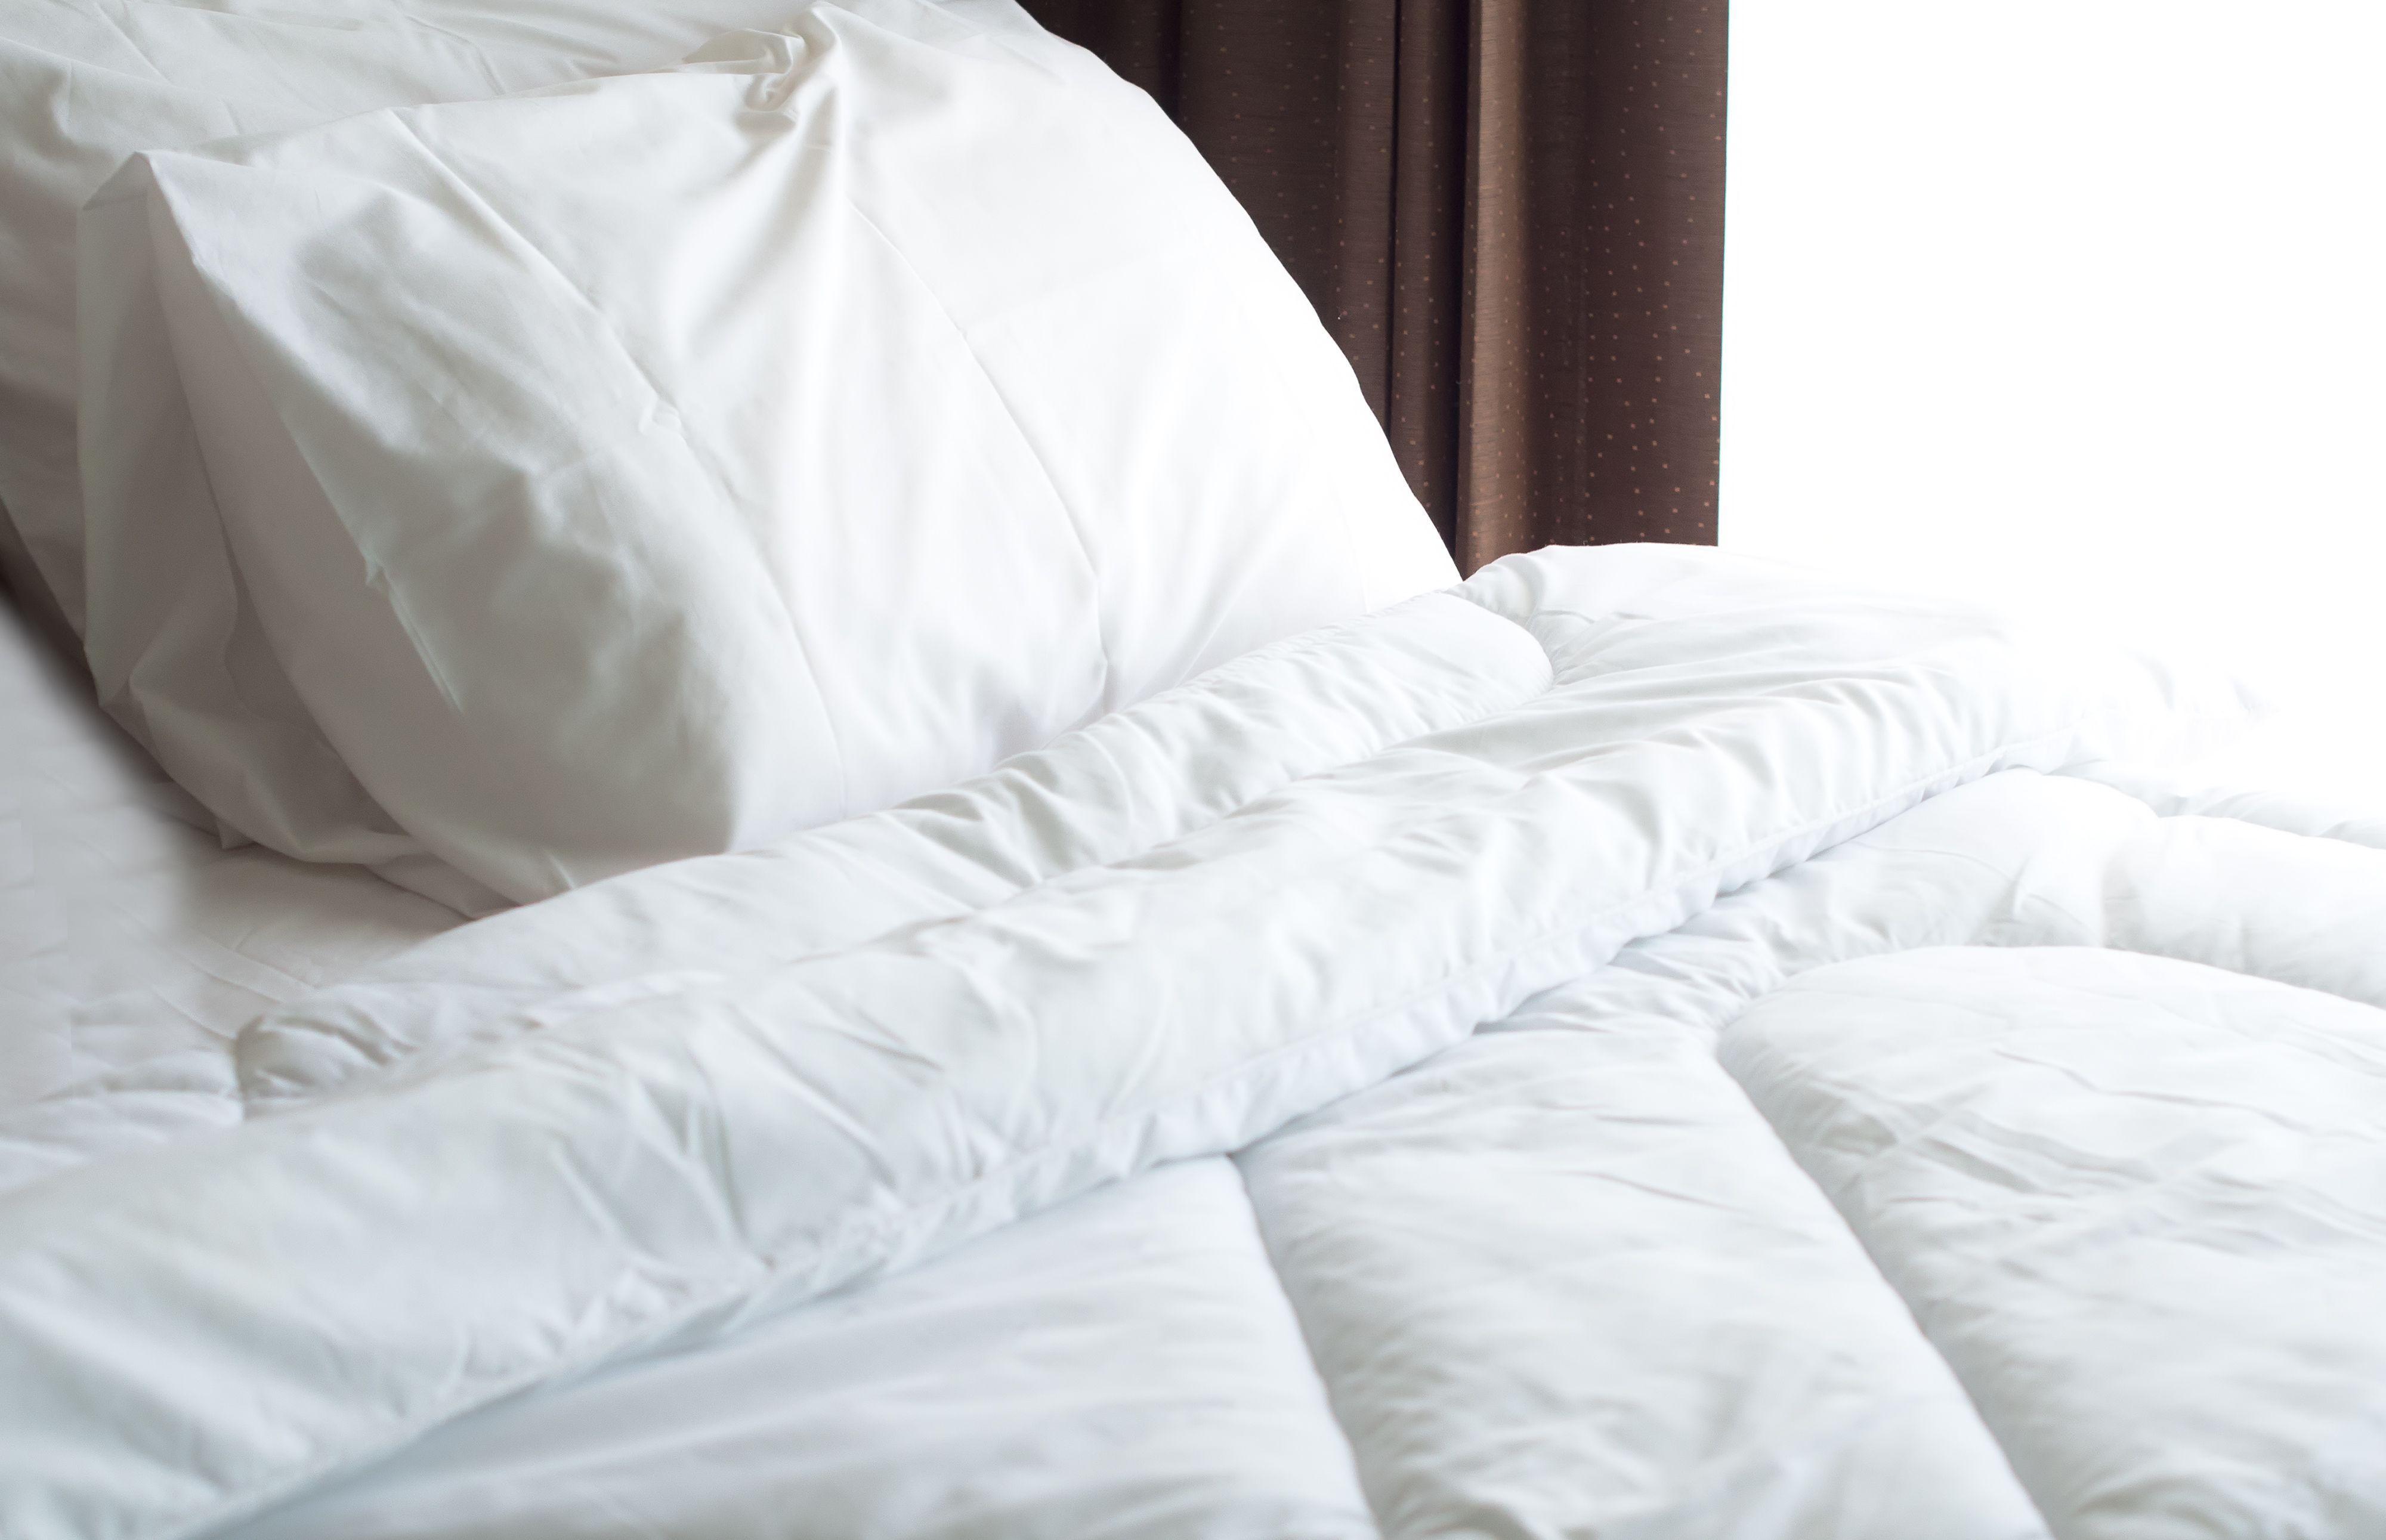 Comforter Buying Guide - How to Buy a Comforter